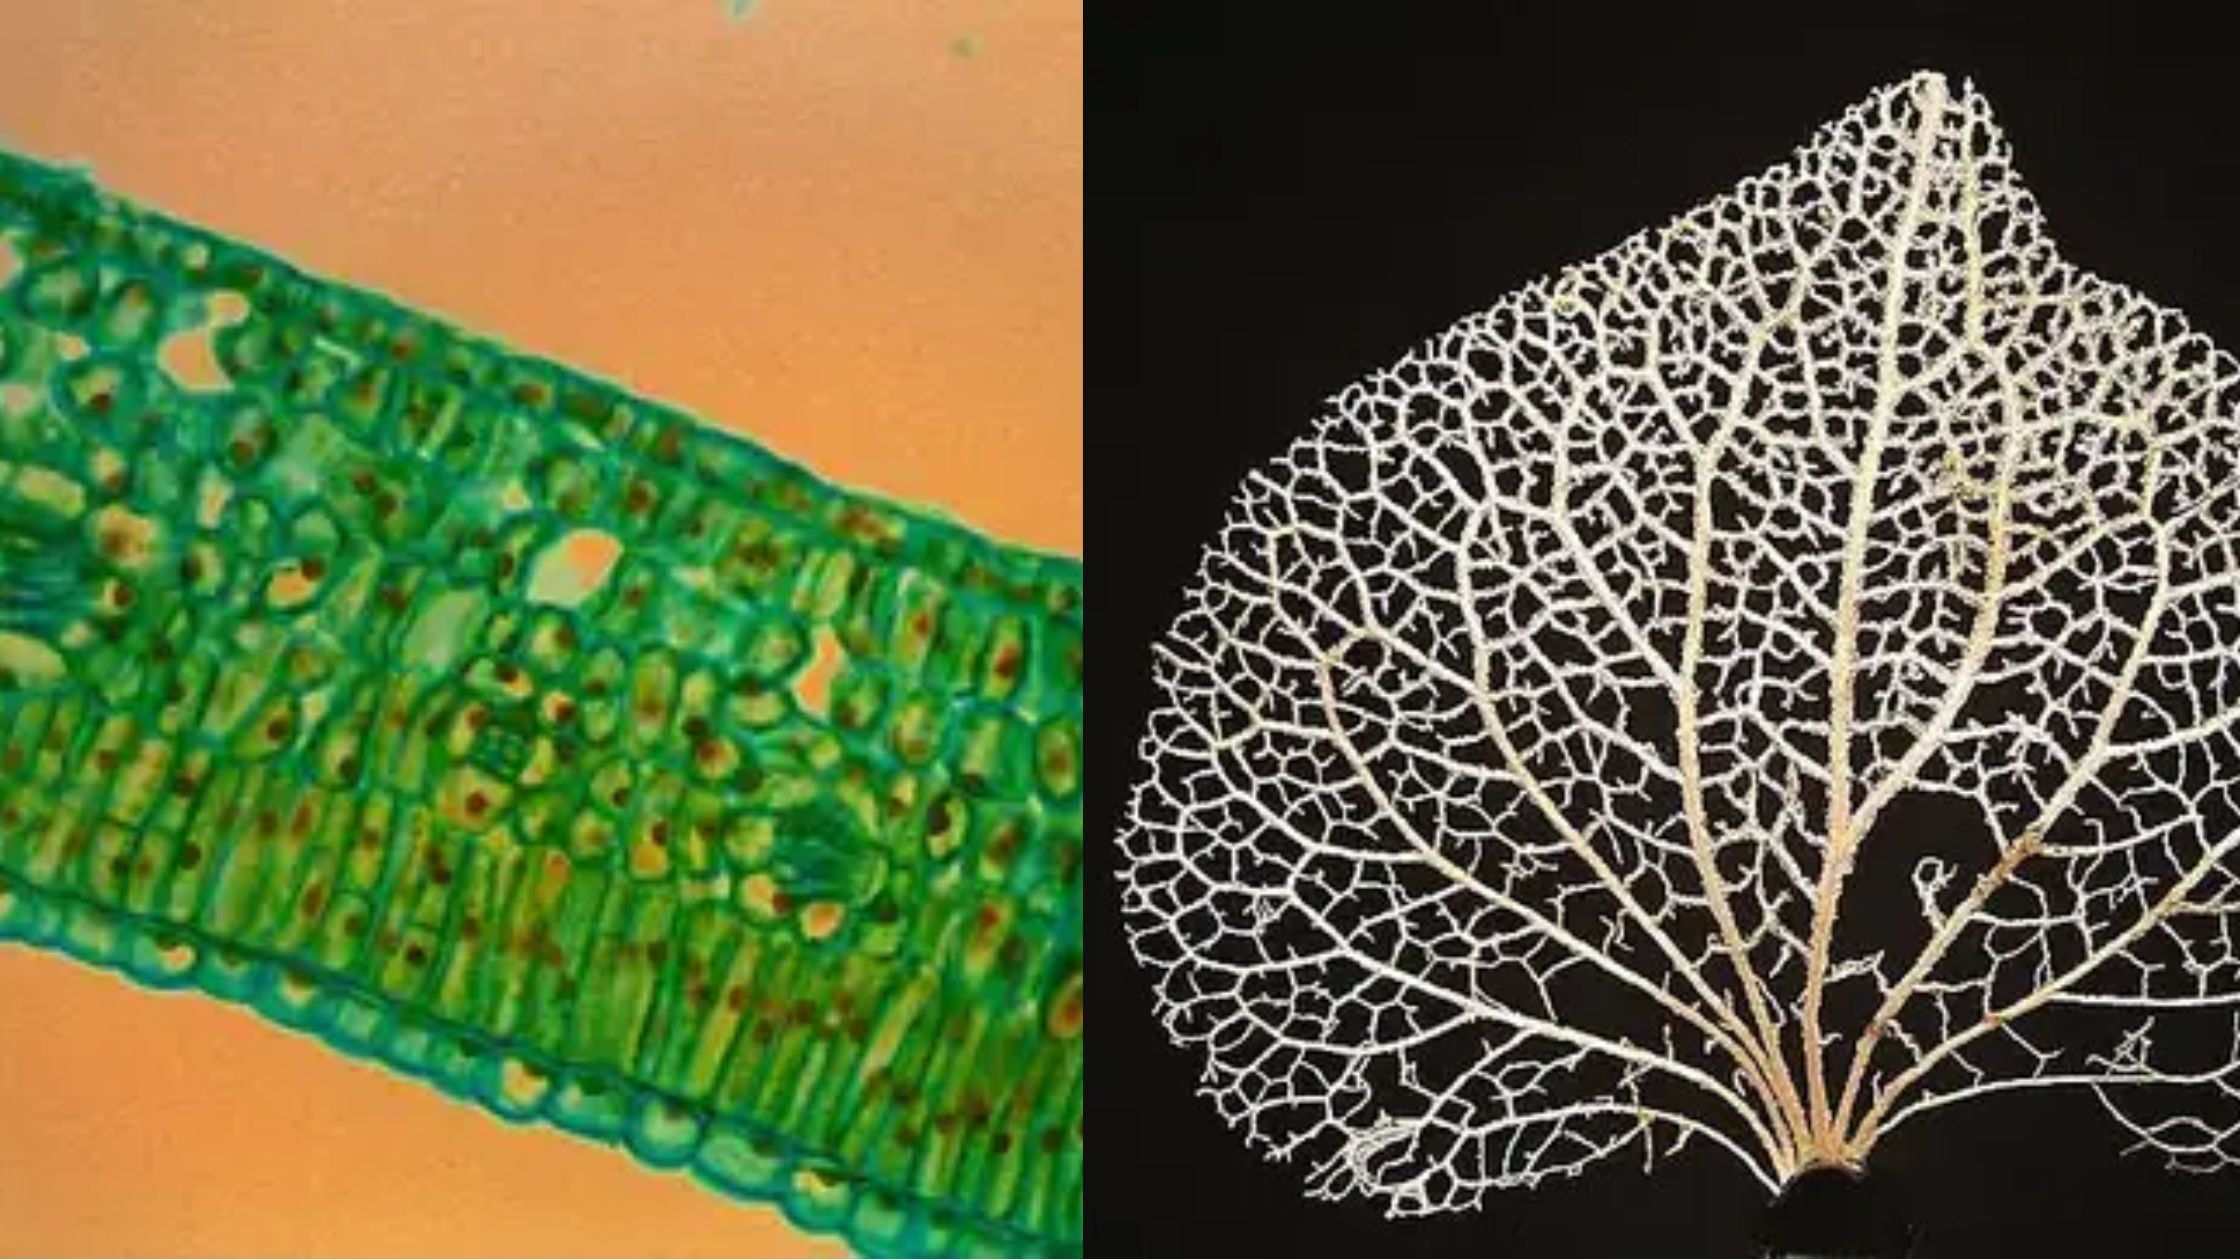 Leaf Structure Under the Microscope